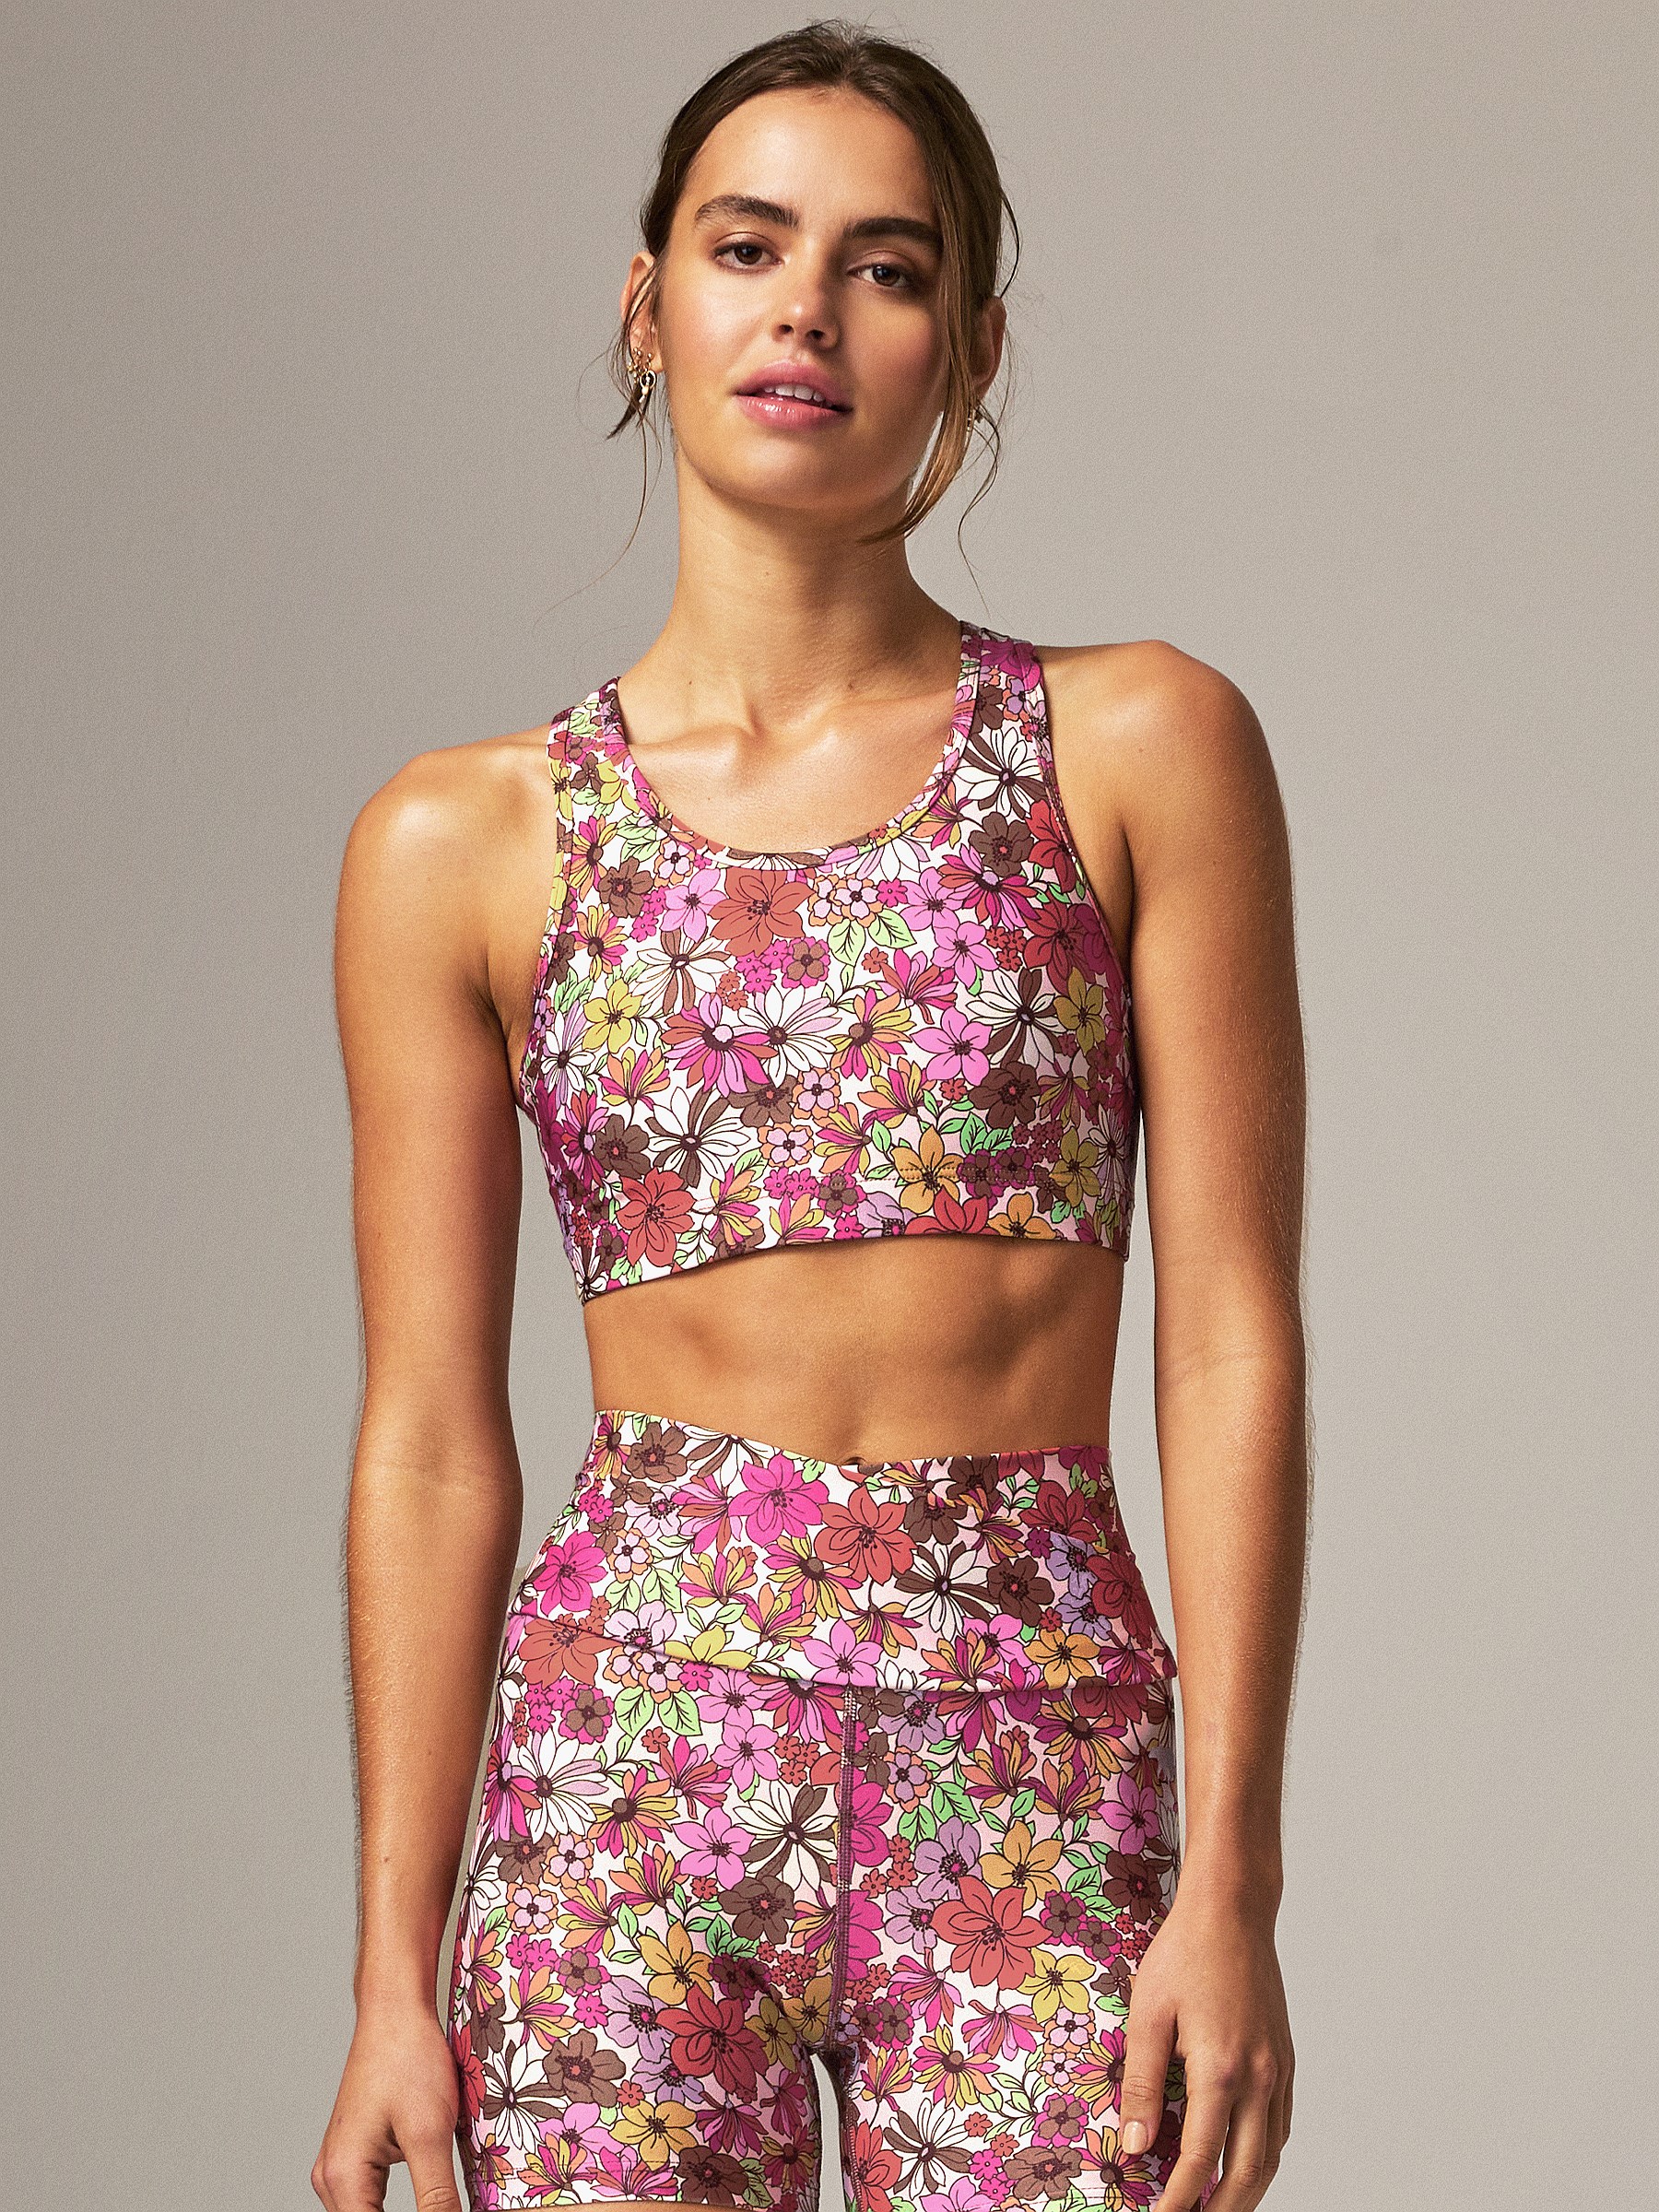 Running Bare No Bounce Sports Bra. Shop Floral Workout Crop Tops.